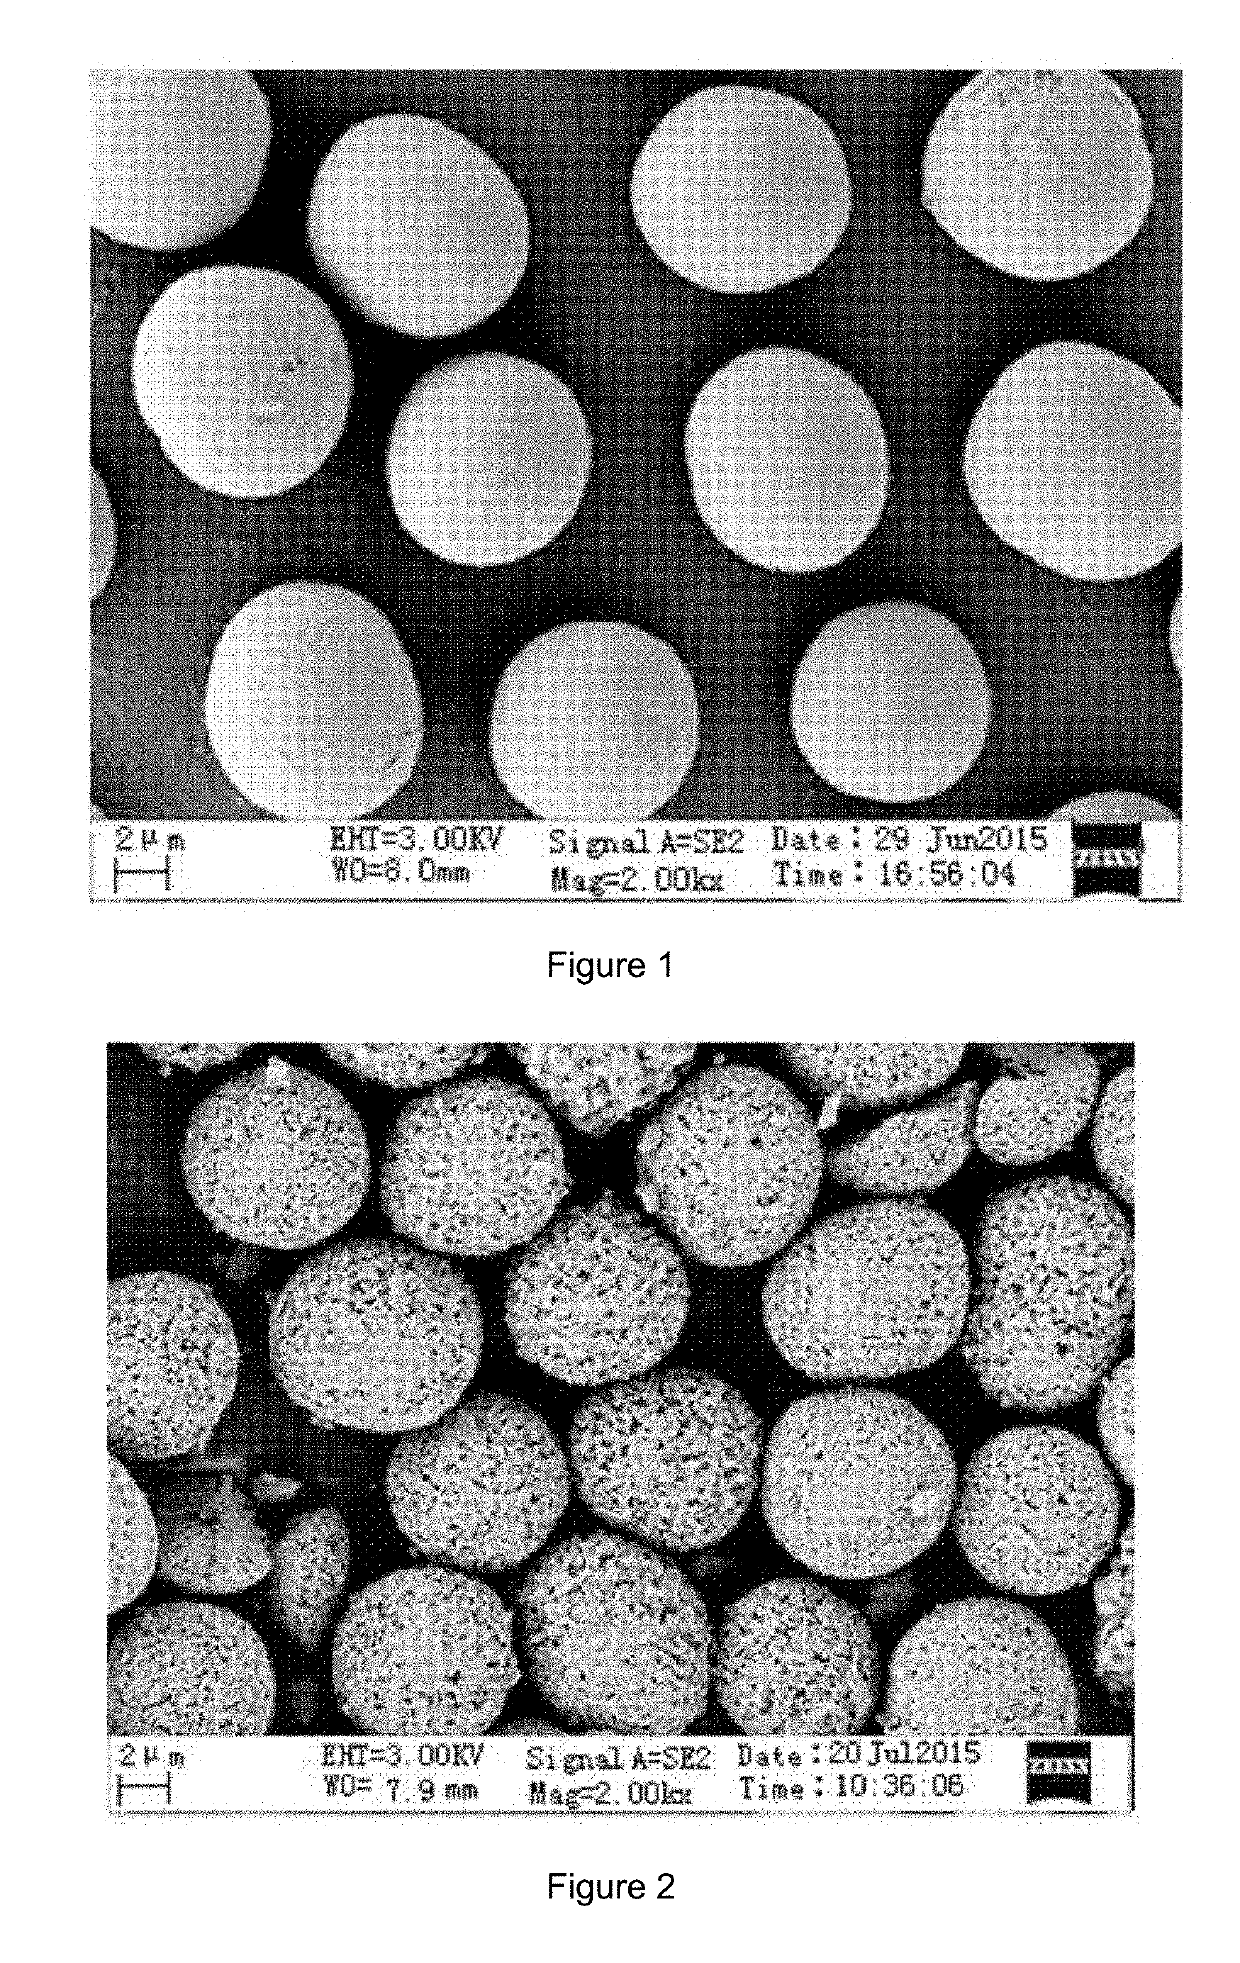 High-quality, lithium-rich and manganese-based positive electrode material for lithium ion battery, and method for synthesizing same